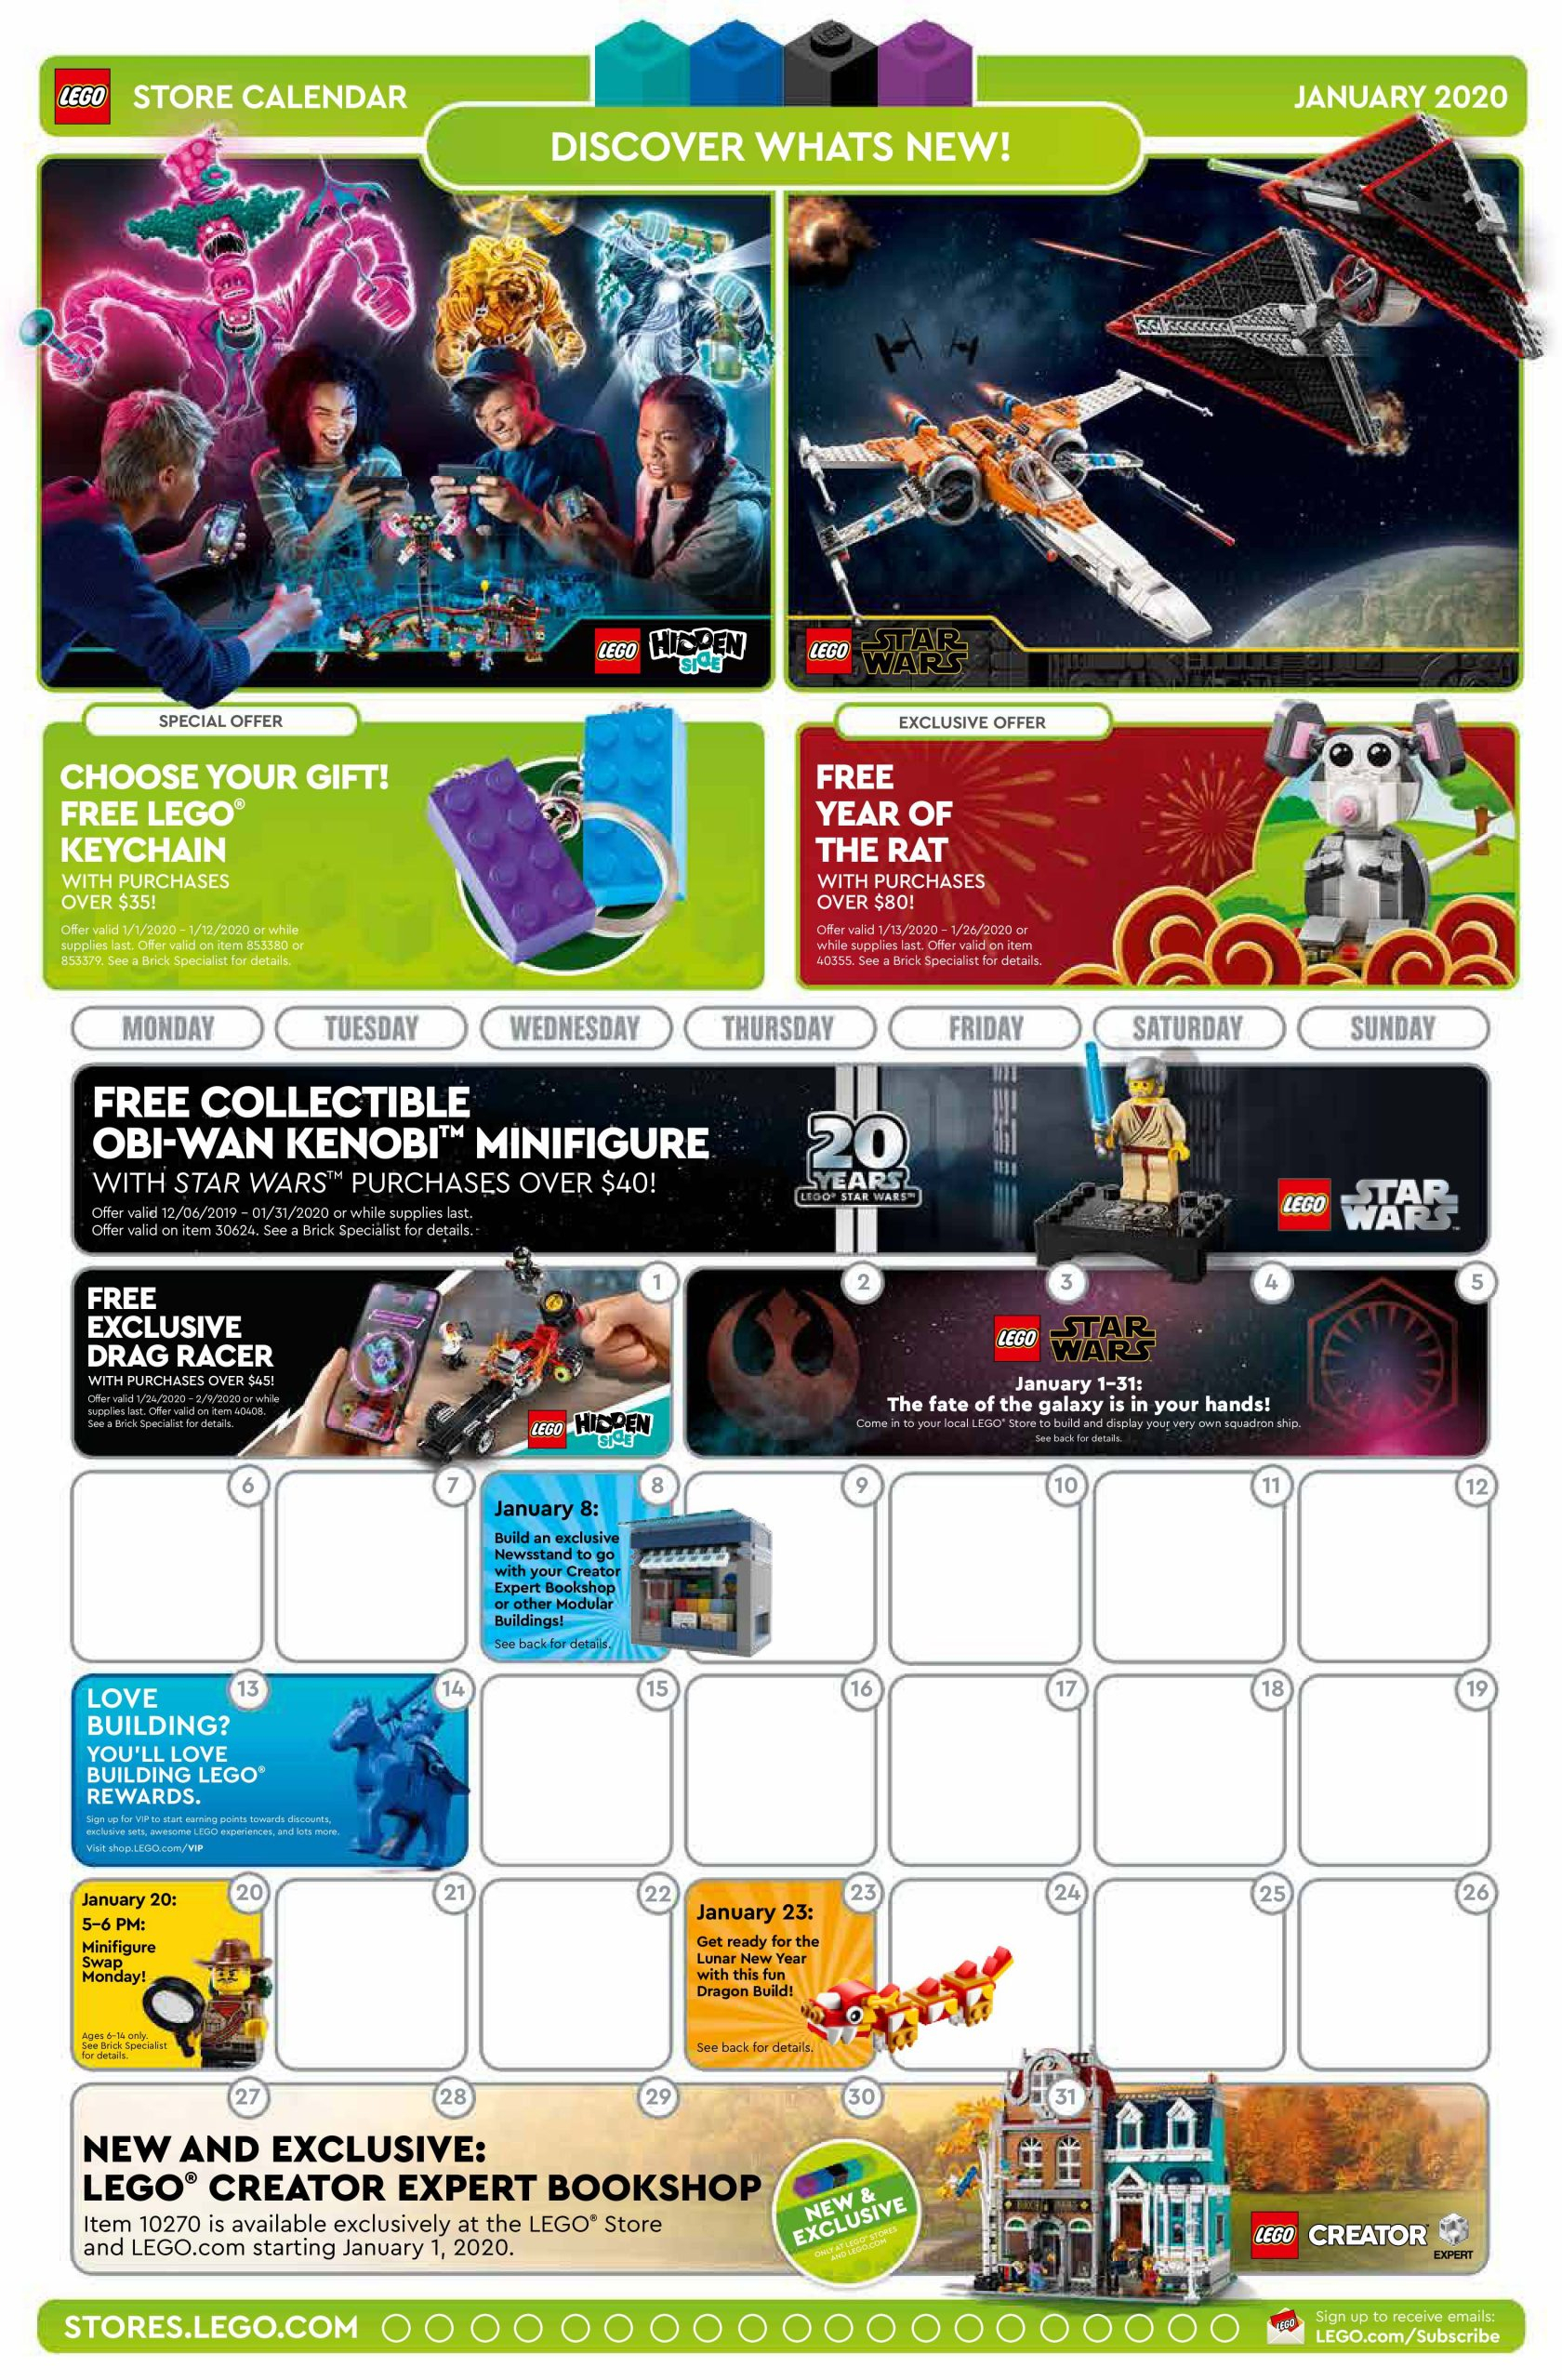 Lego January 2020 Store Calendar Promotions &amp; Events - The